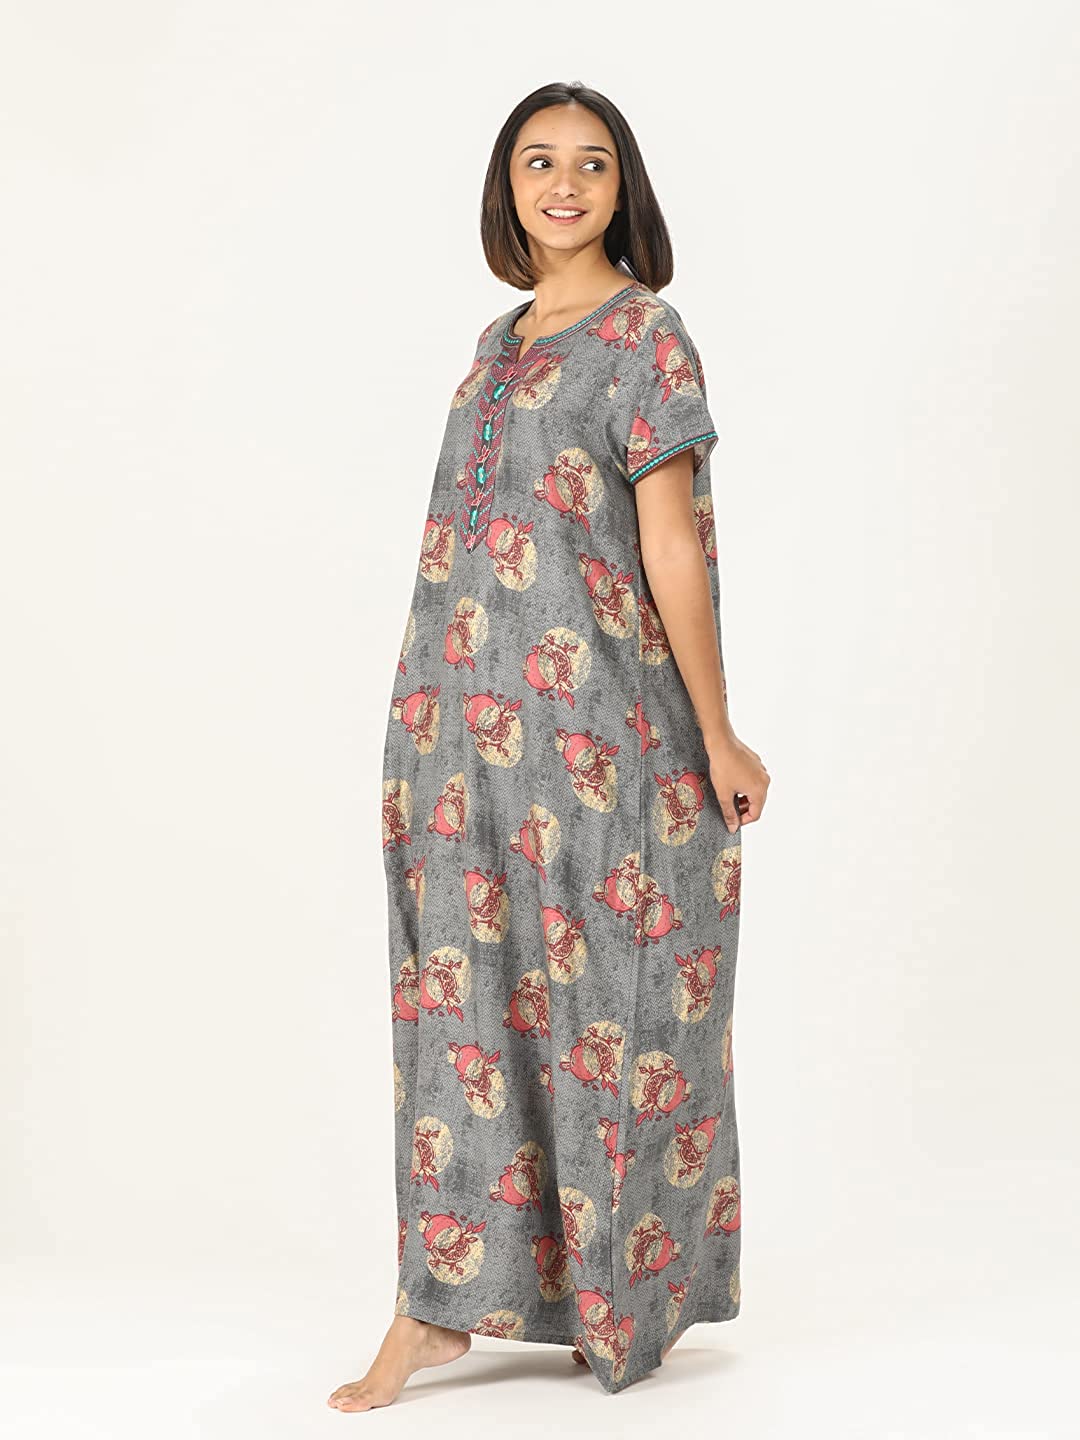 Evolove Loose Fit Viscose Liva Long Maxi Nighty Sleepwear Nightgown for Women or Ladies with Stylish Embroidery Round Neck Floral Printed Super Soft Comfortable Design ( M to 3XL Size )